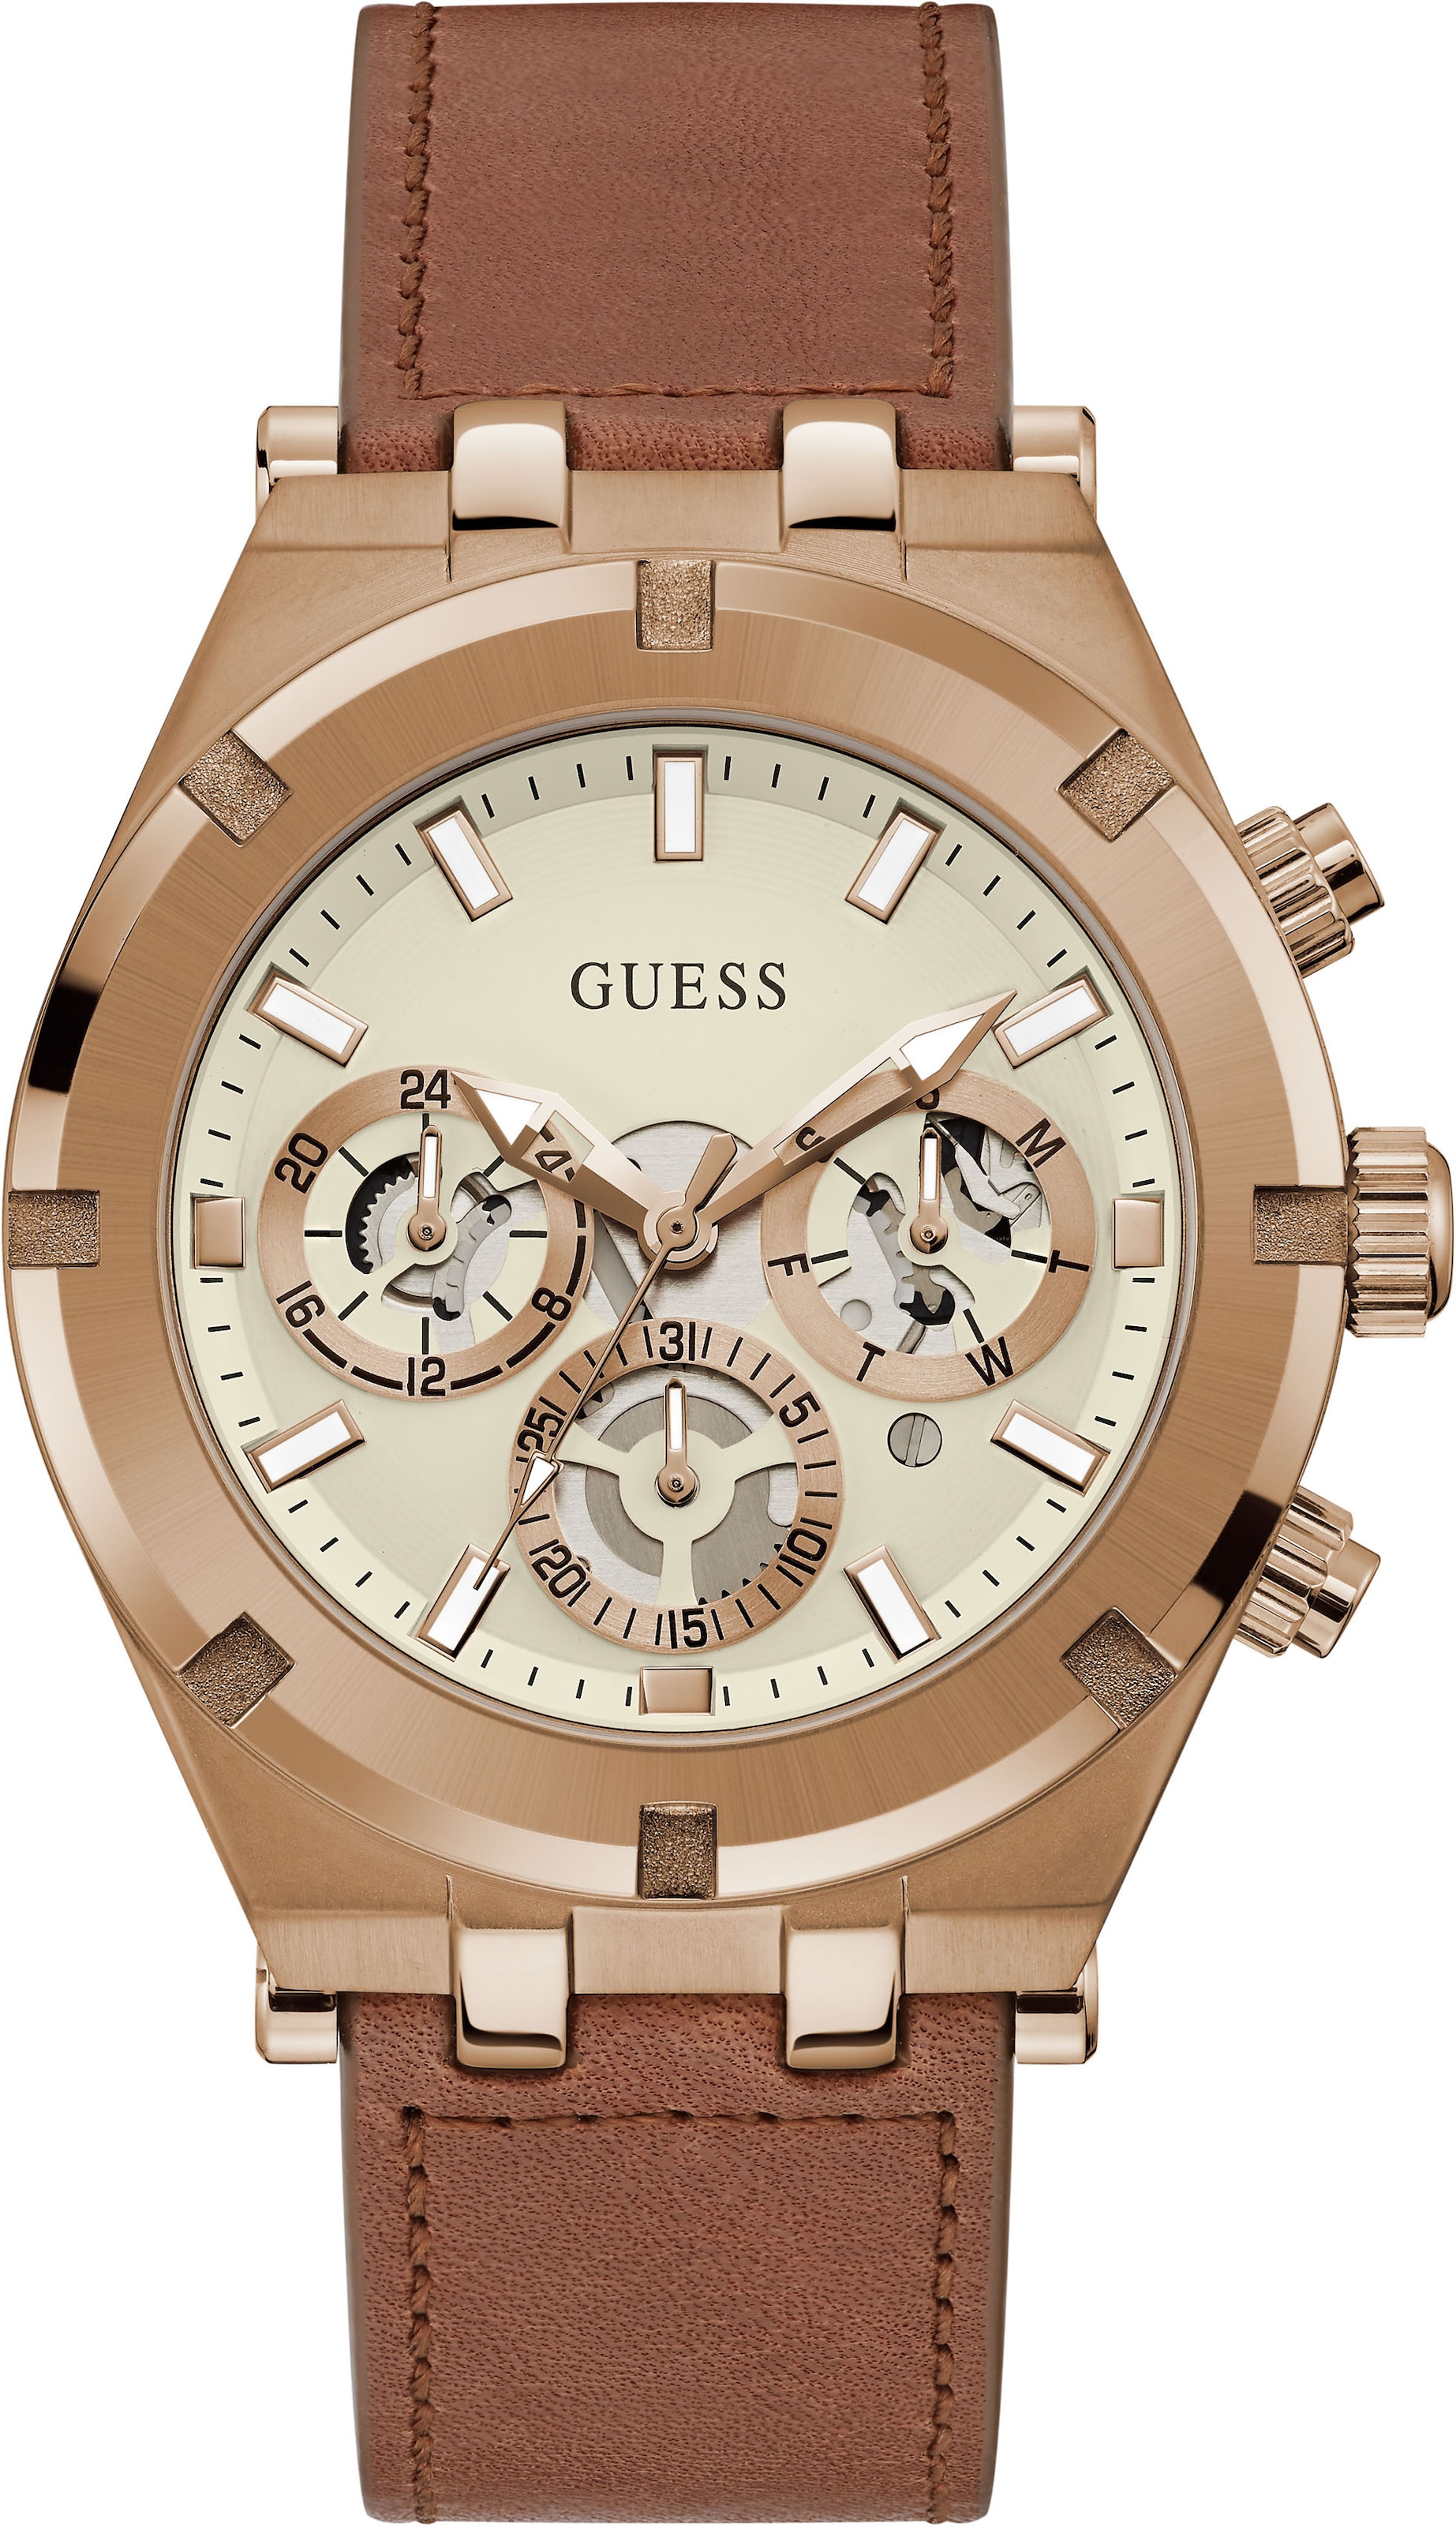 Guess Multifunktionsuhr »CONTINENTAL, GW0262G3«